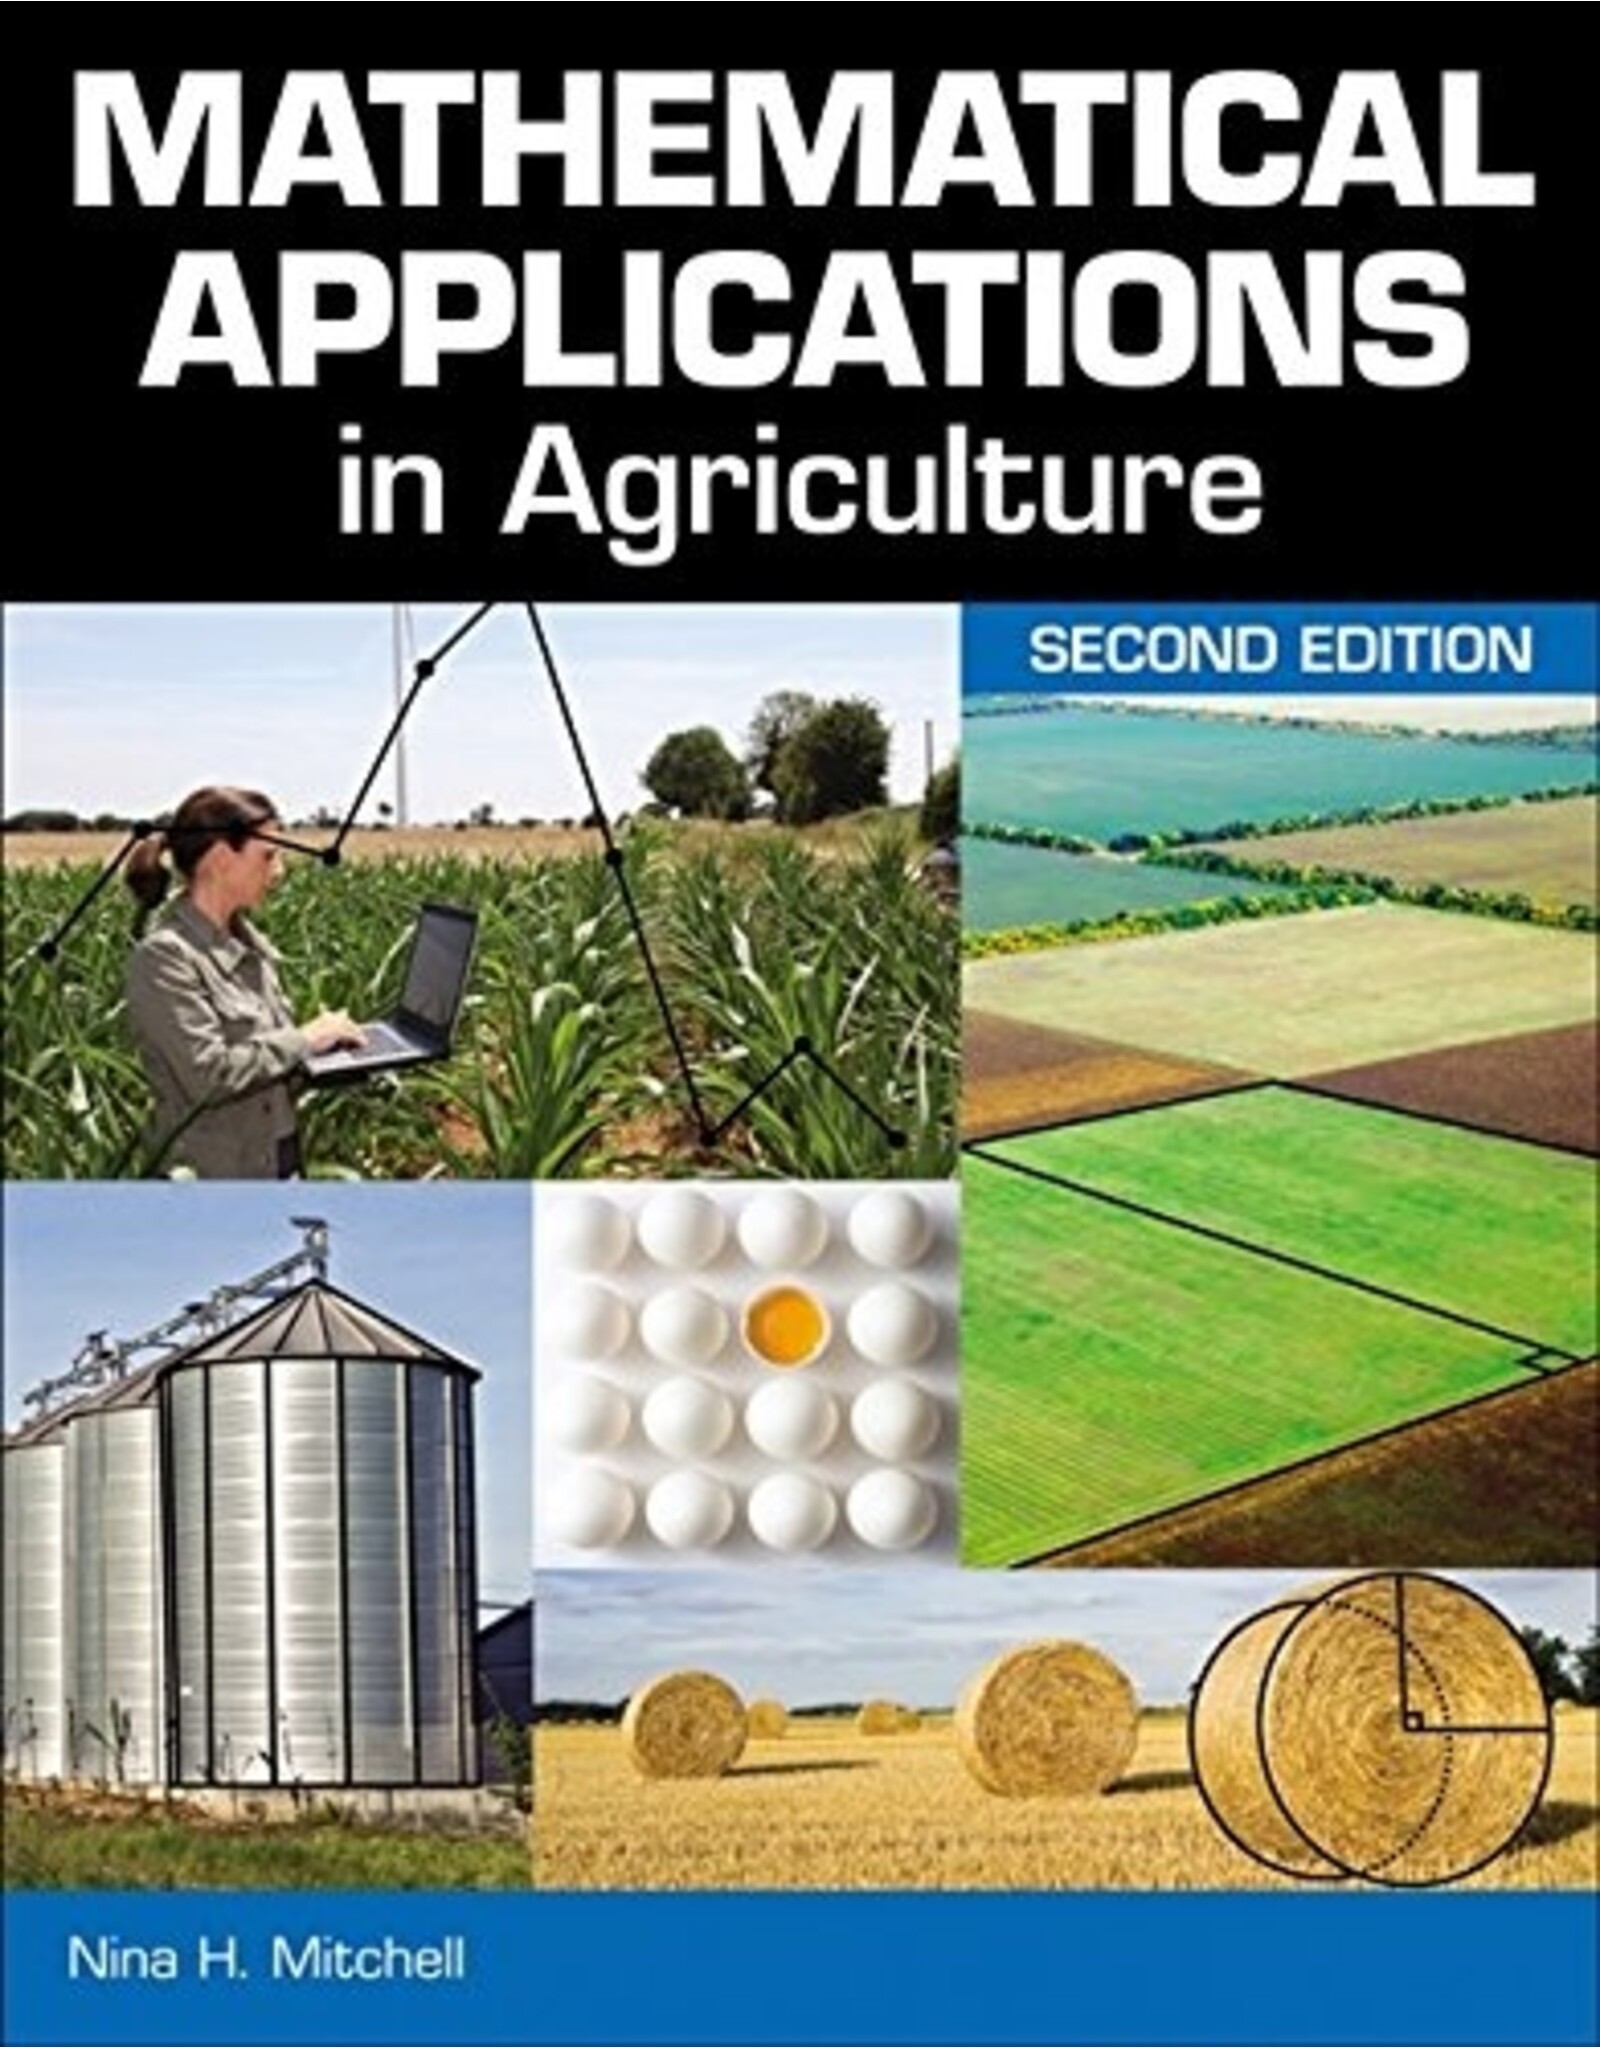 Mathematical Applications in Agriculture - 2nd Ed.